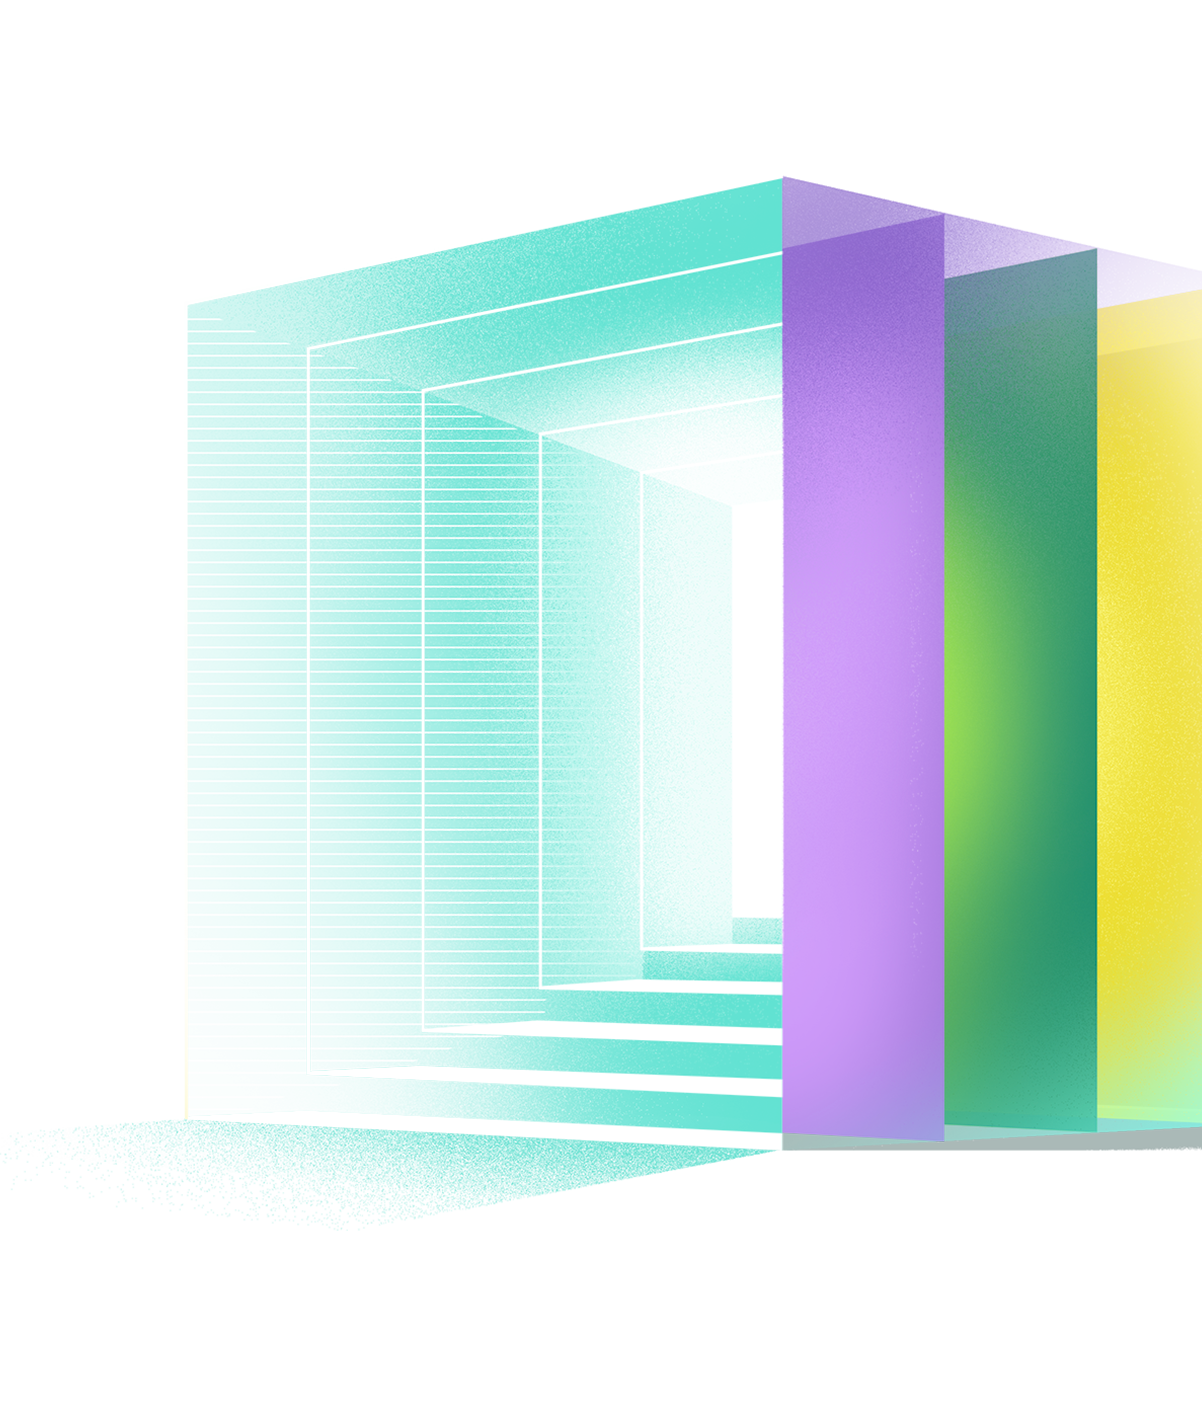 Graphic of a multicolored cube make of other cubes